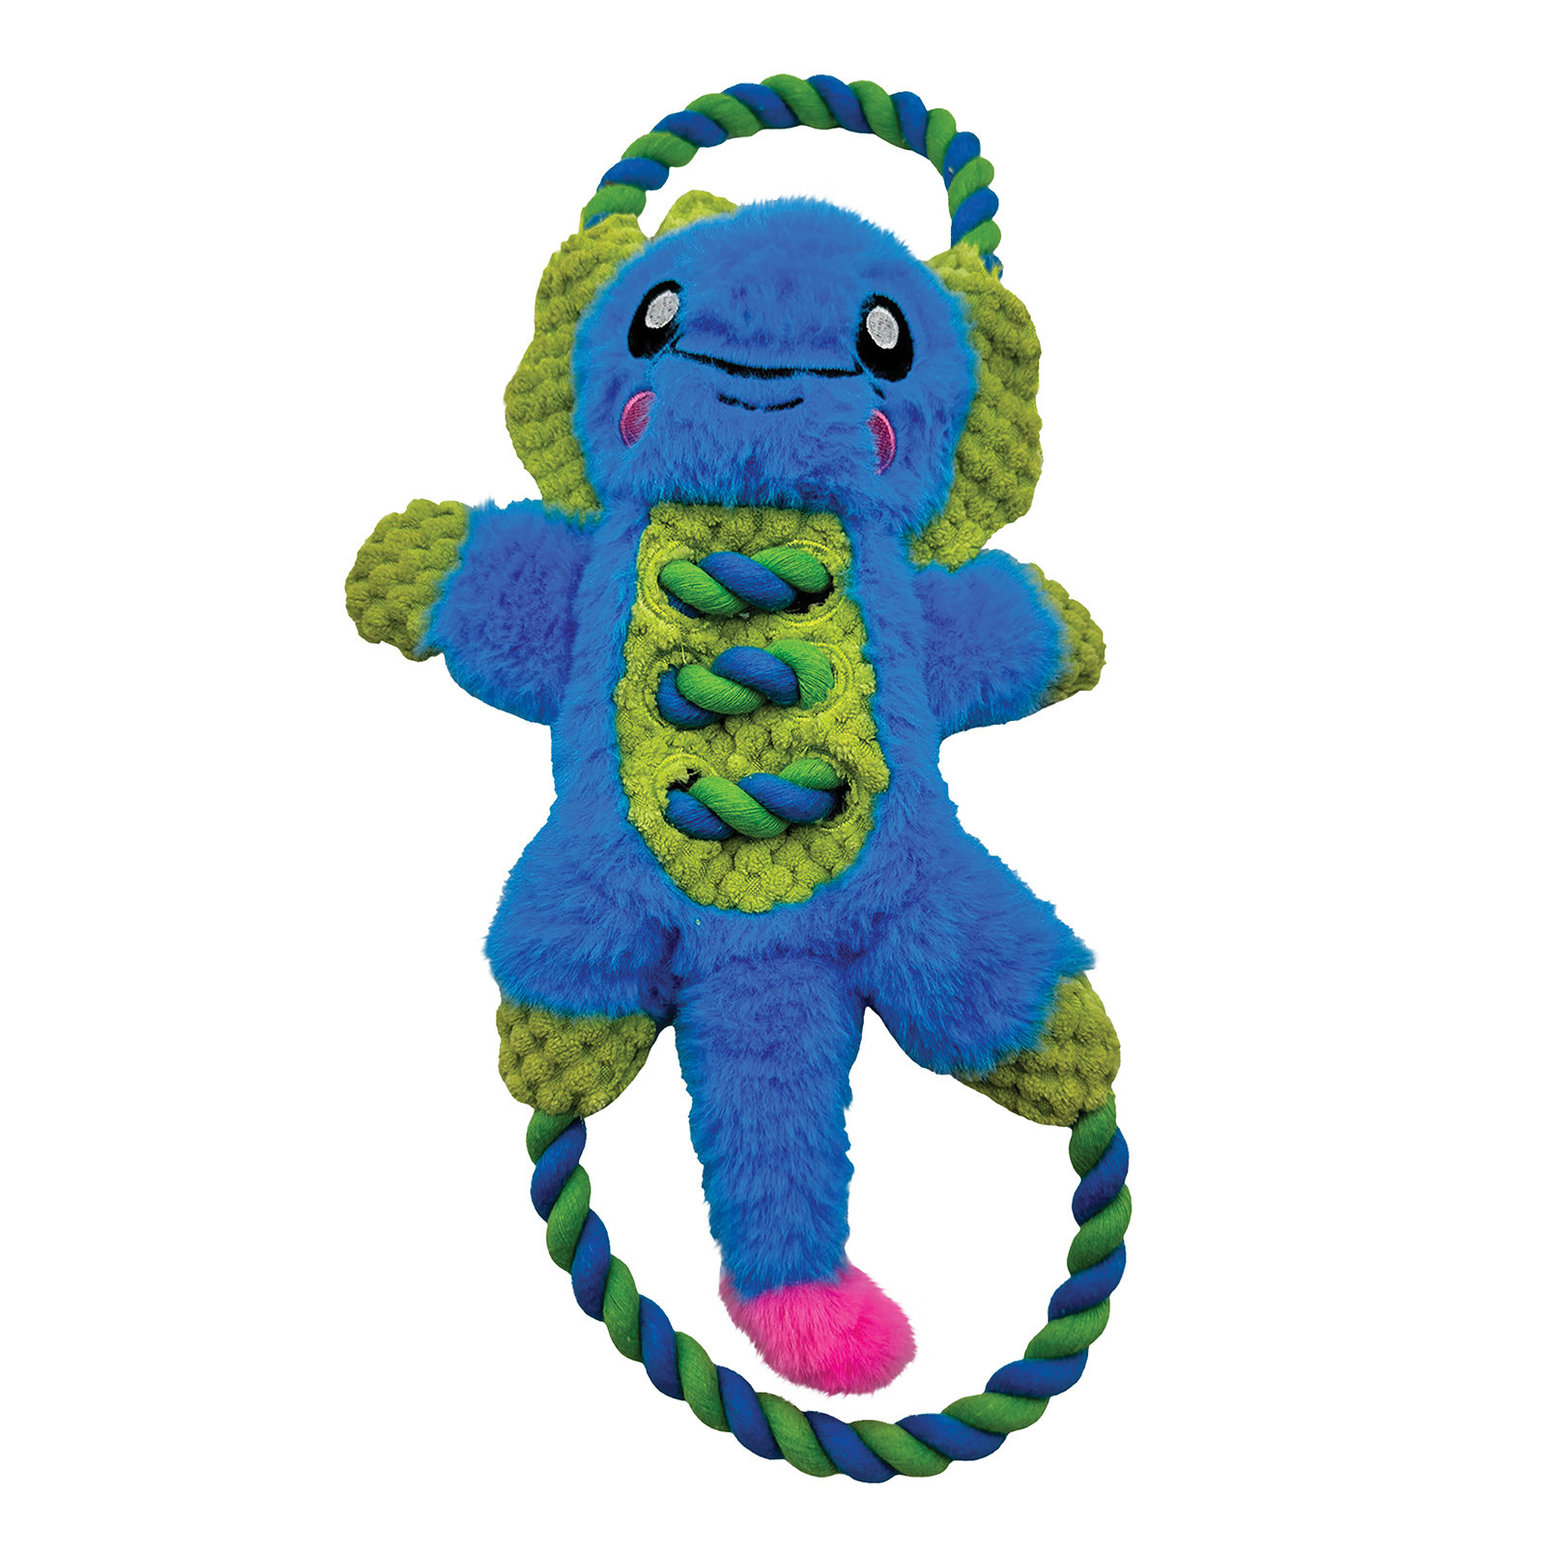 https://cdn.renspets.com/product_images/pet-obsession-dino-tug-toy-14/14_/64bb5a6393f07800184f8ae1/pdp_zoom.jpg?c=1689999971